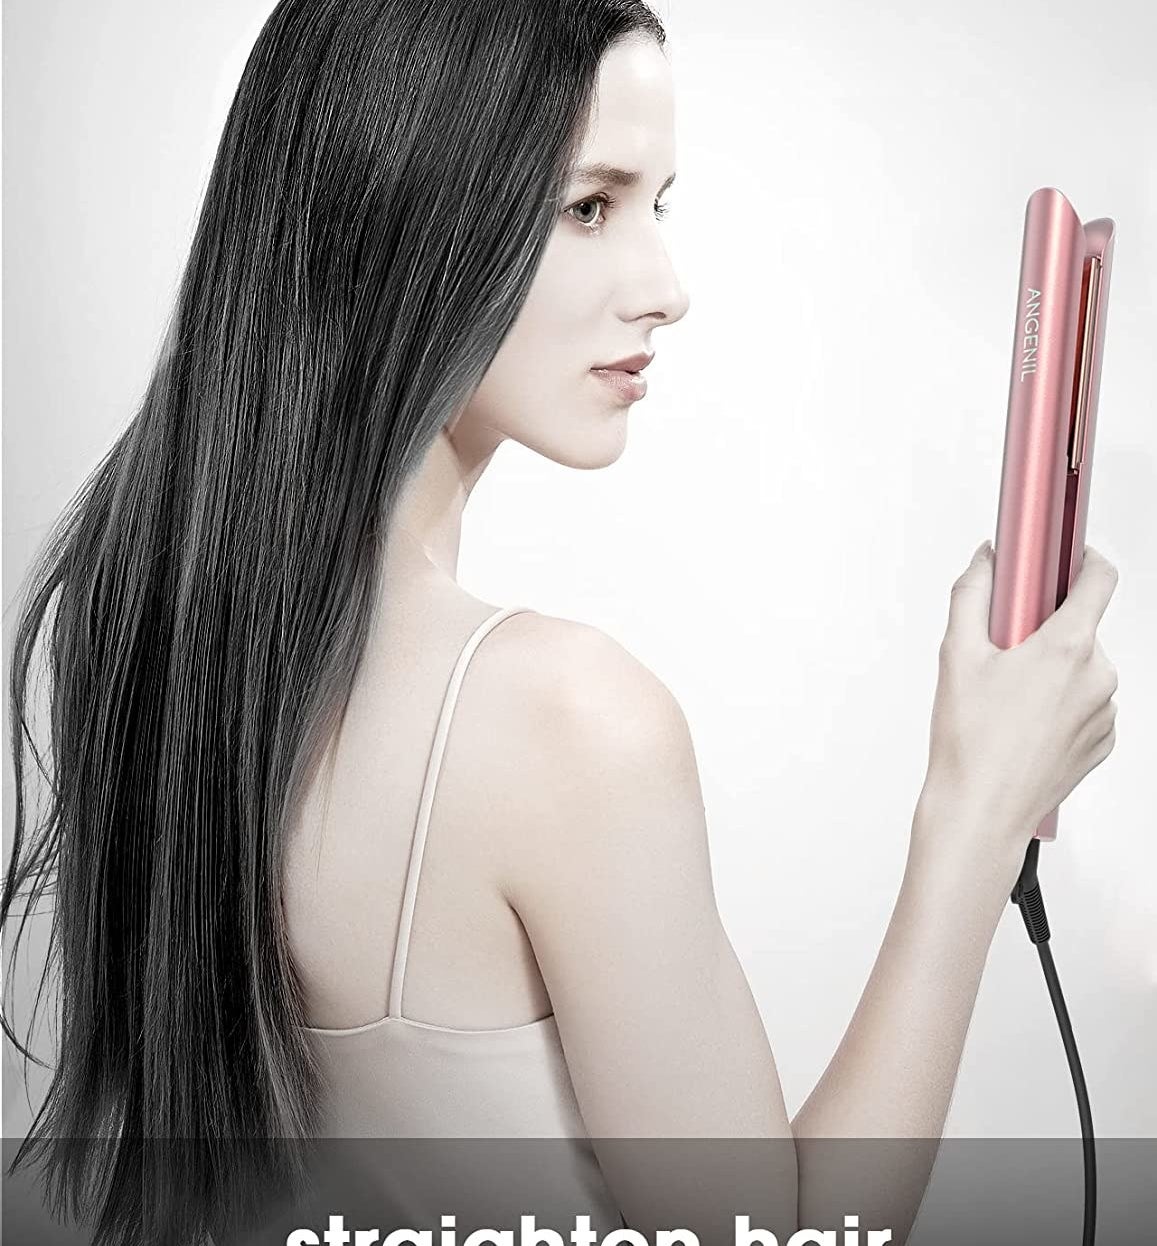 A person holding a hair straightener